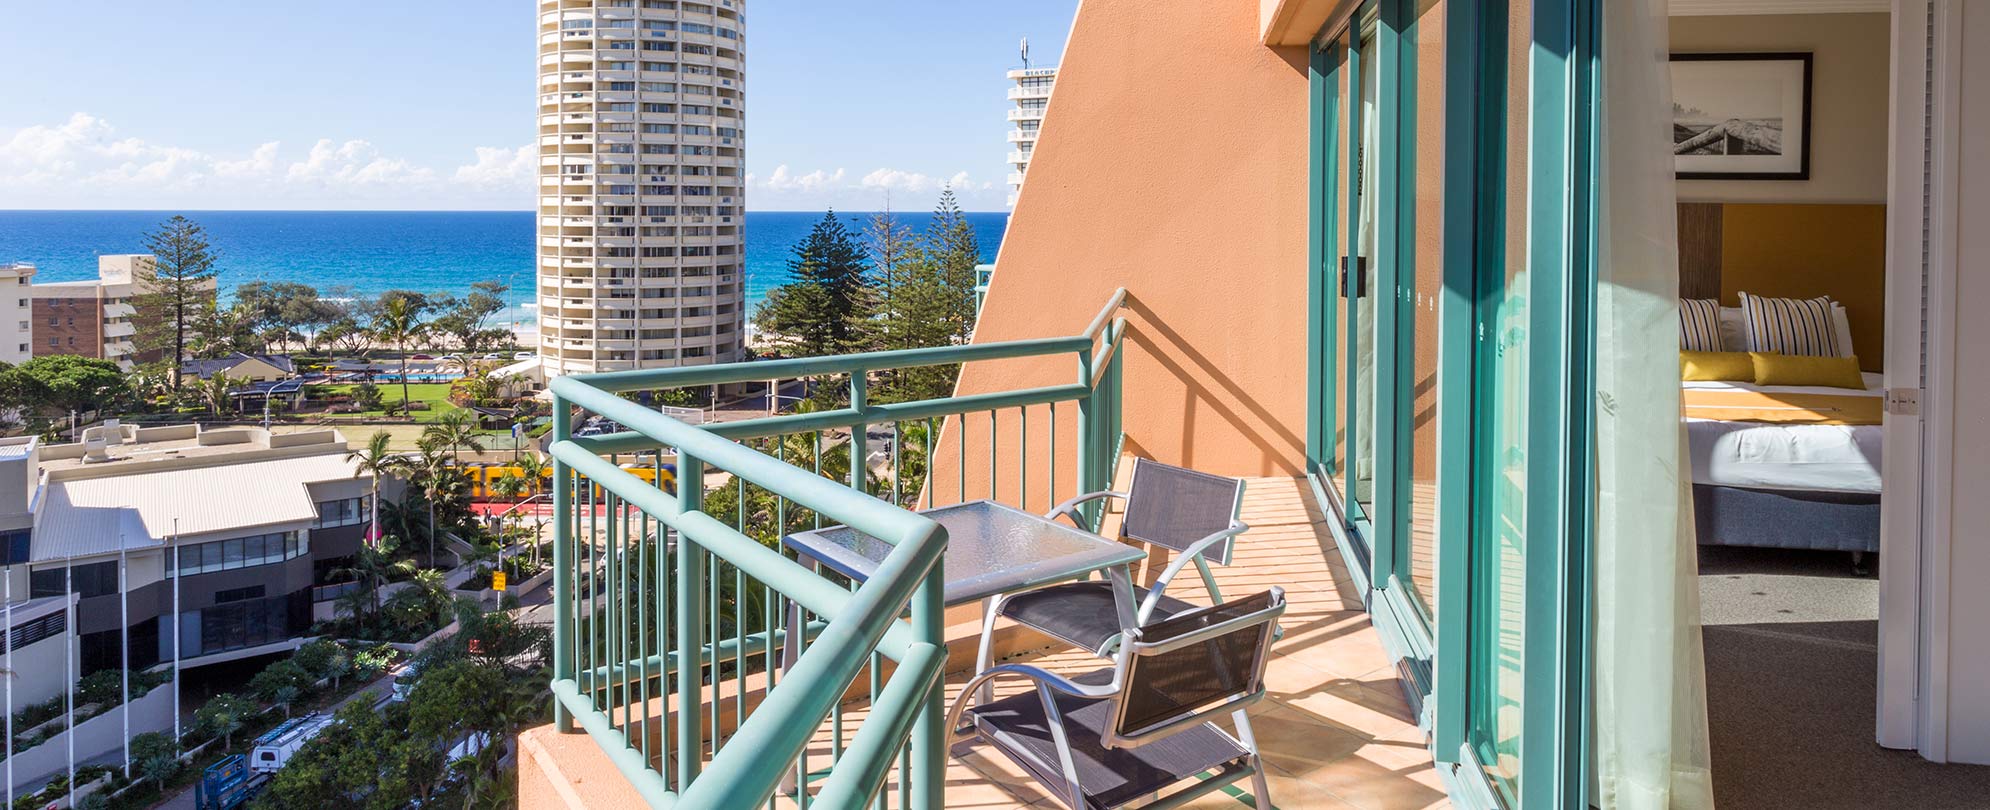 The balcony of a Club Wyndham Crown Towers 1-bedroom suite, overlooking the city and ocean in Surfer's Paradise, QLD.